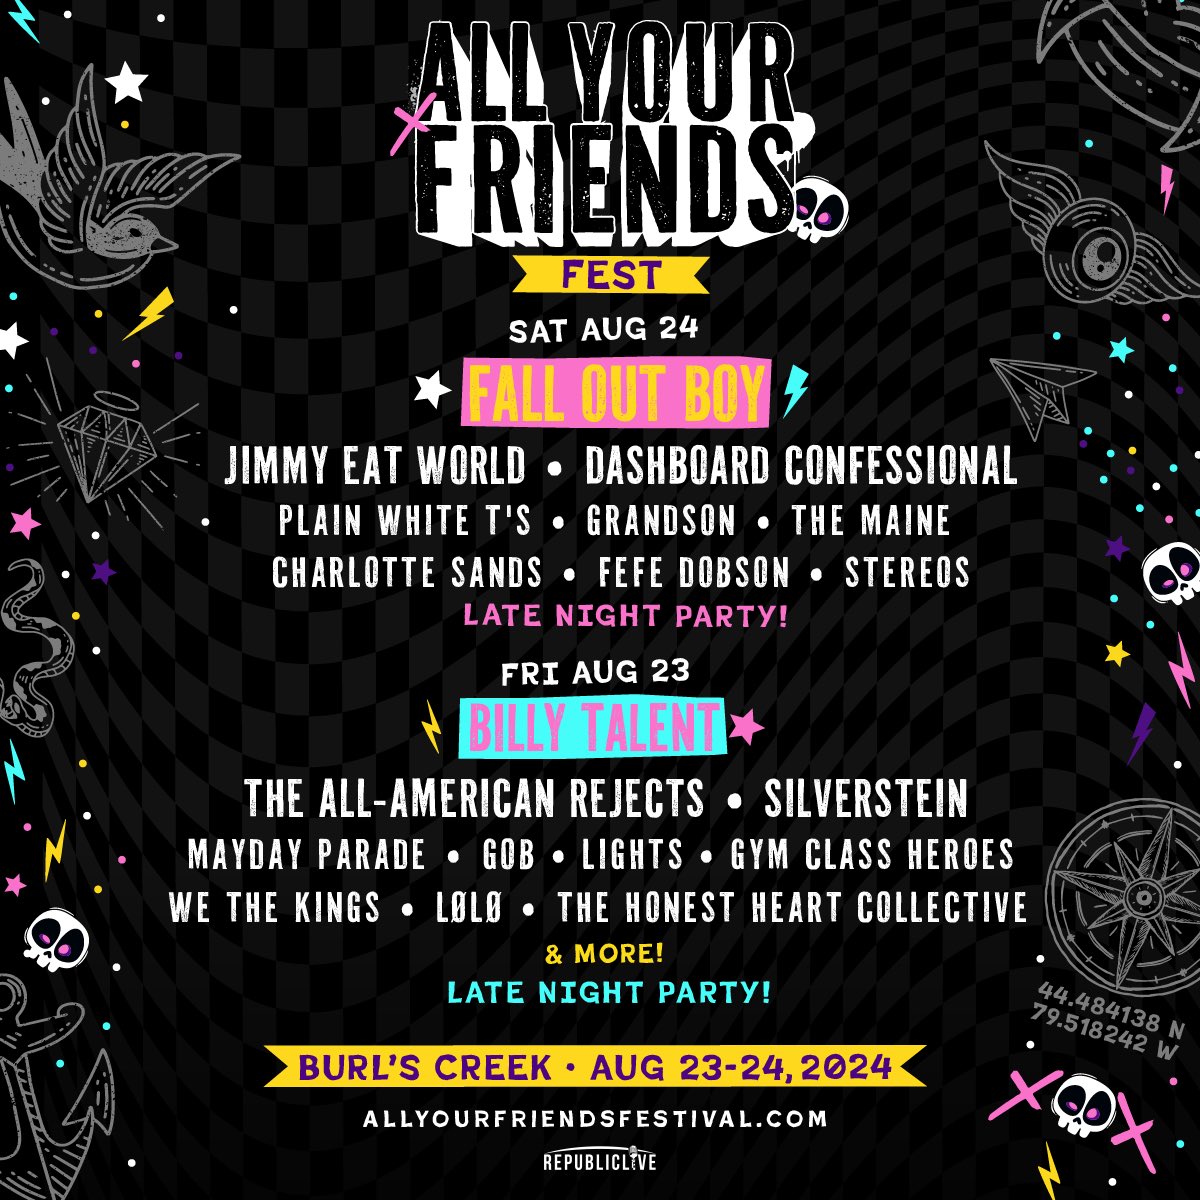 taking things up north to ontario to headline @AYFFest on august 24th ☁️ tickets go on sale this friday @ 10am ET allyourfriendsfestival.com